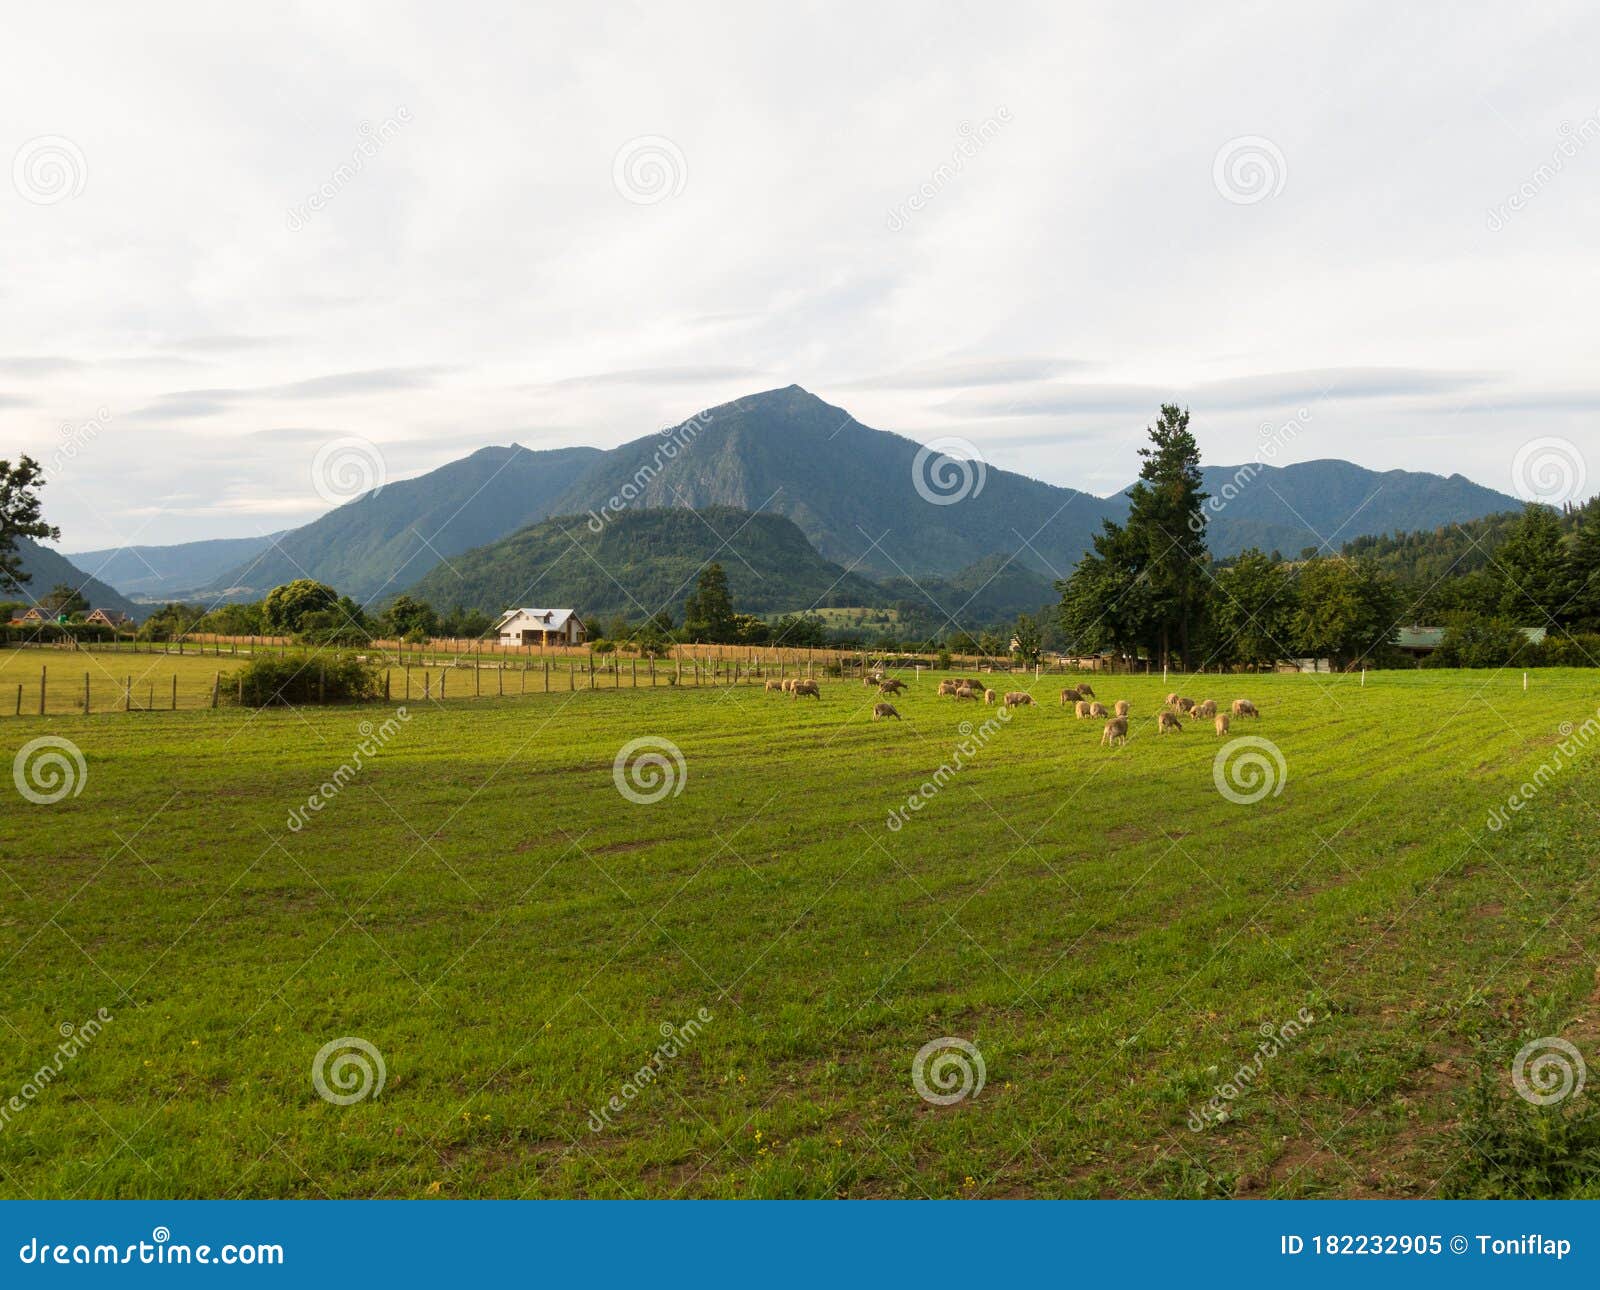 sheep grazing in the fields of los rios region, valdivia zone, in southern chile, araucania andean